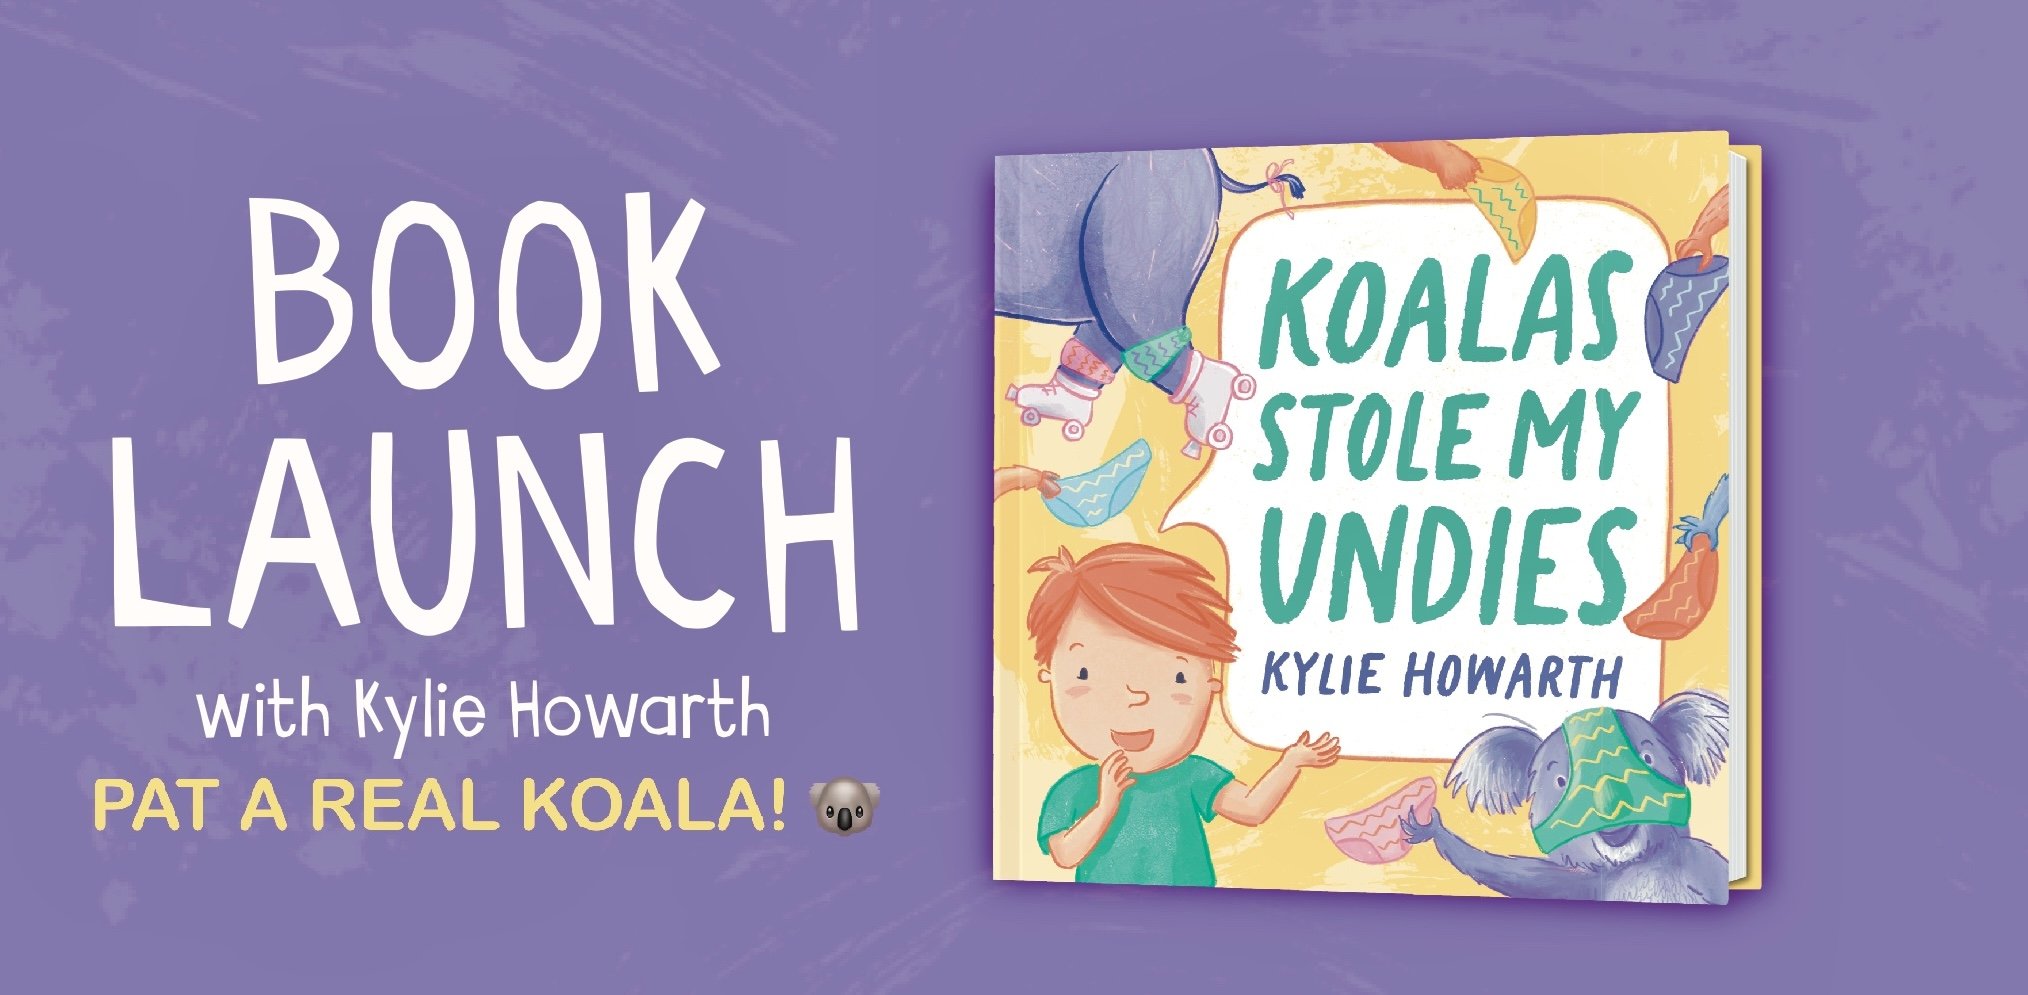 Kylie Howarth — Koalas stole my undies, book launch with Kylie Howarth